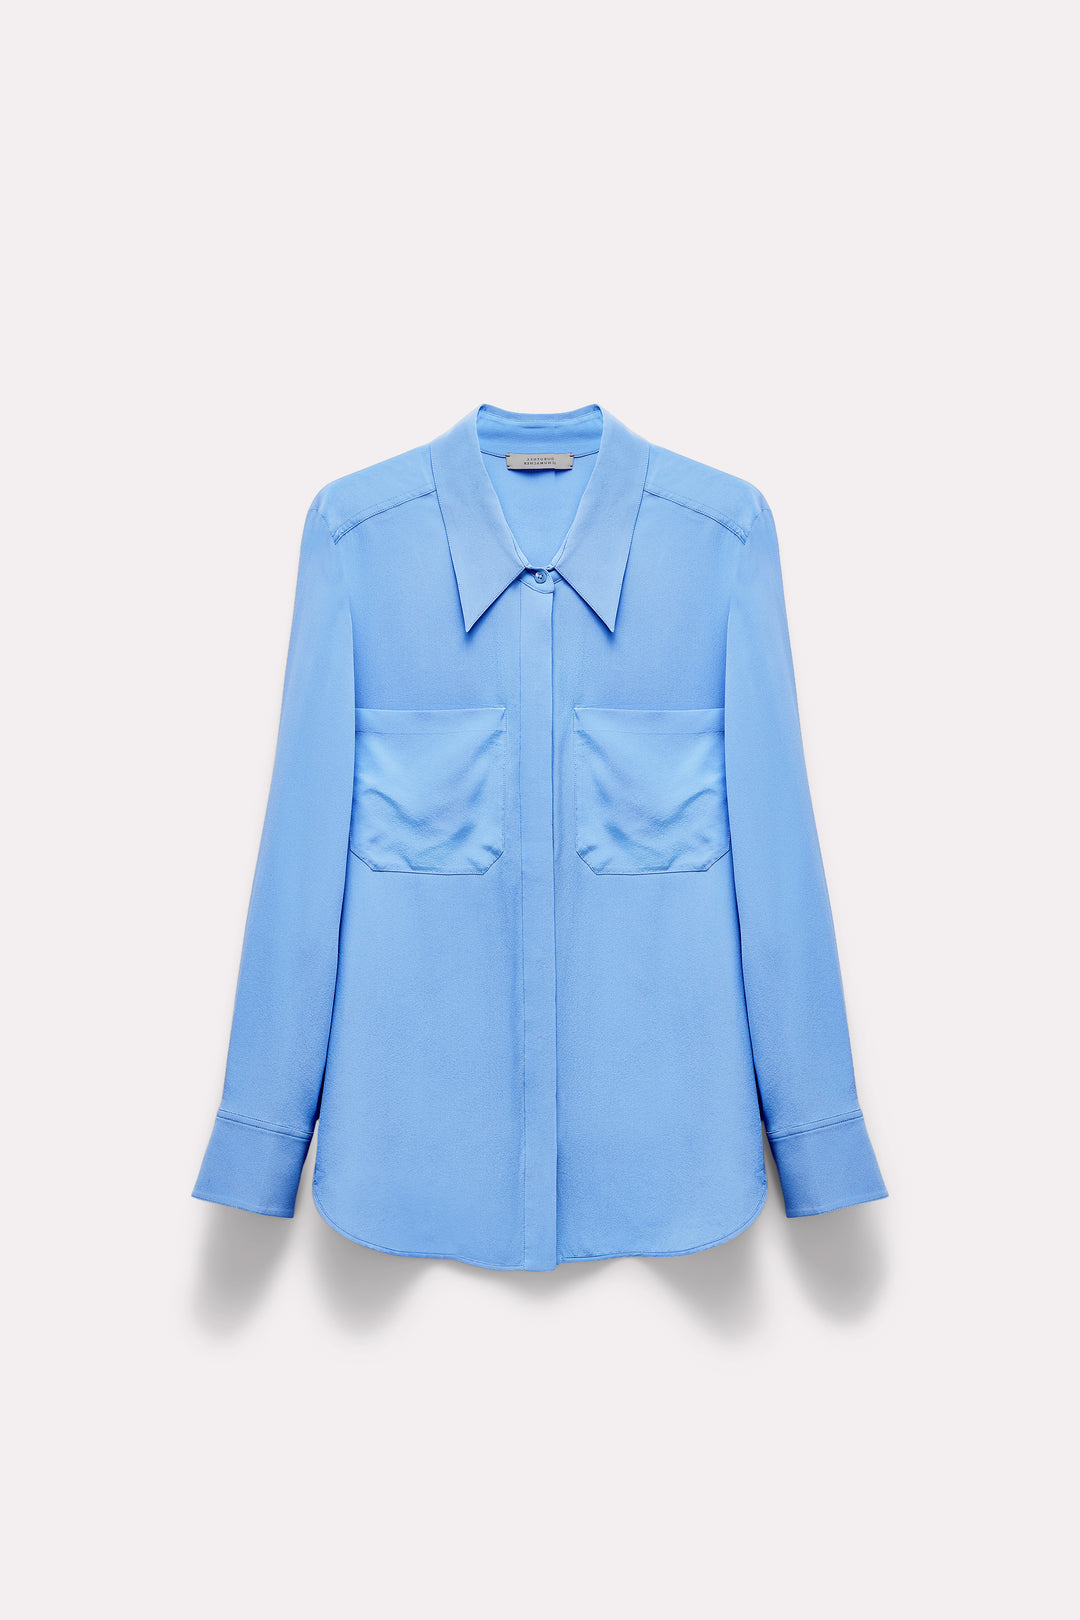 Bluse Dorothee Schumacher SOPHISTICATED VOLUMES blouse